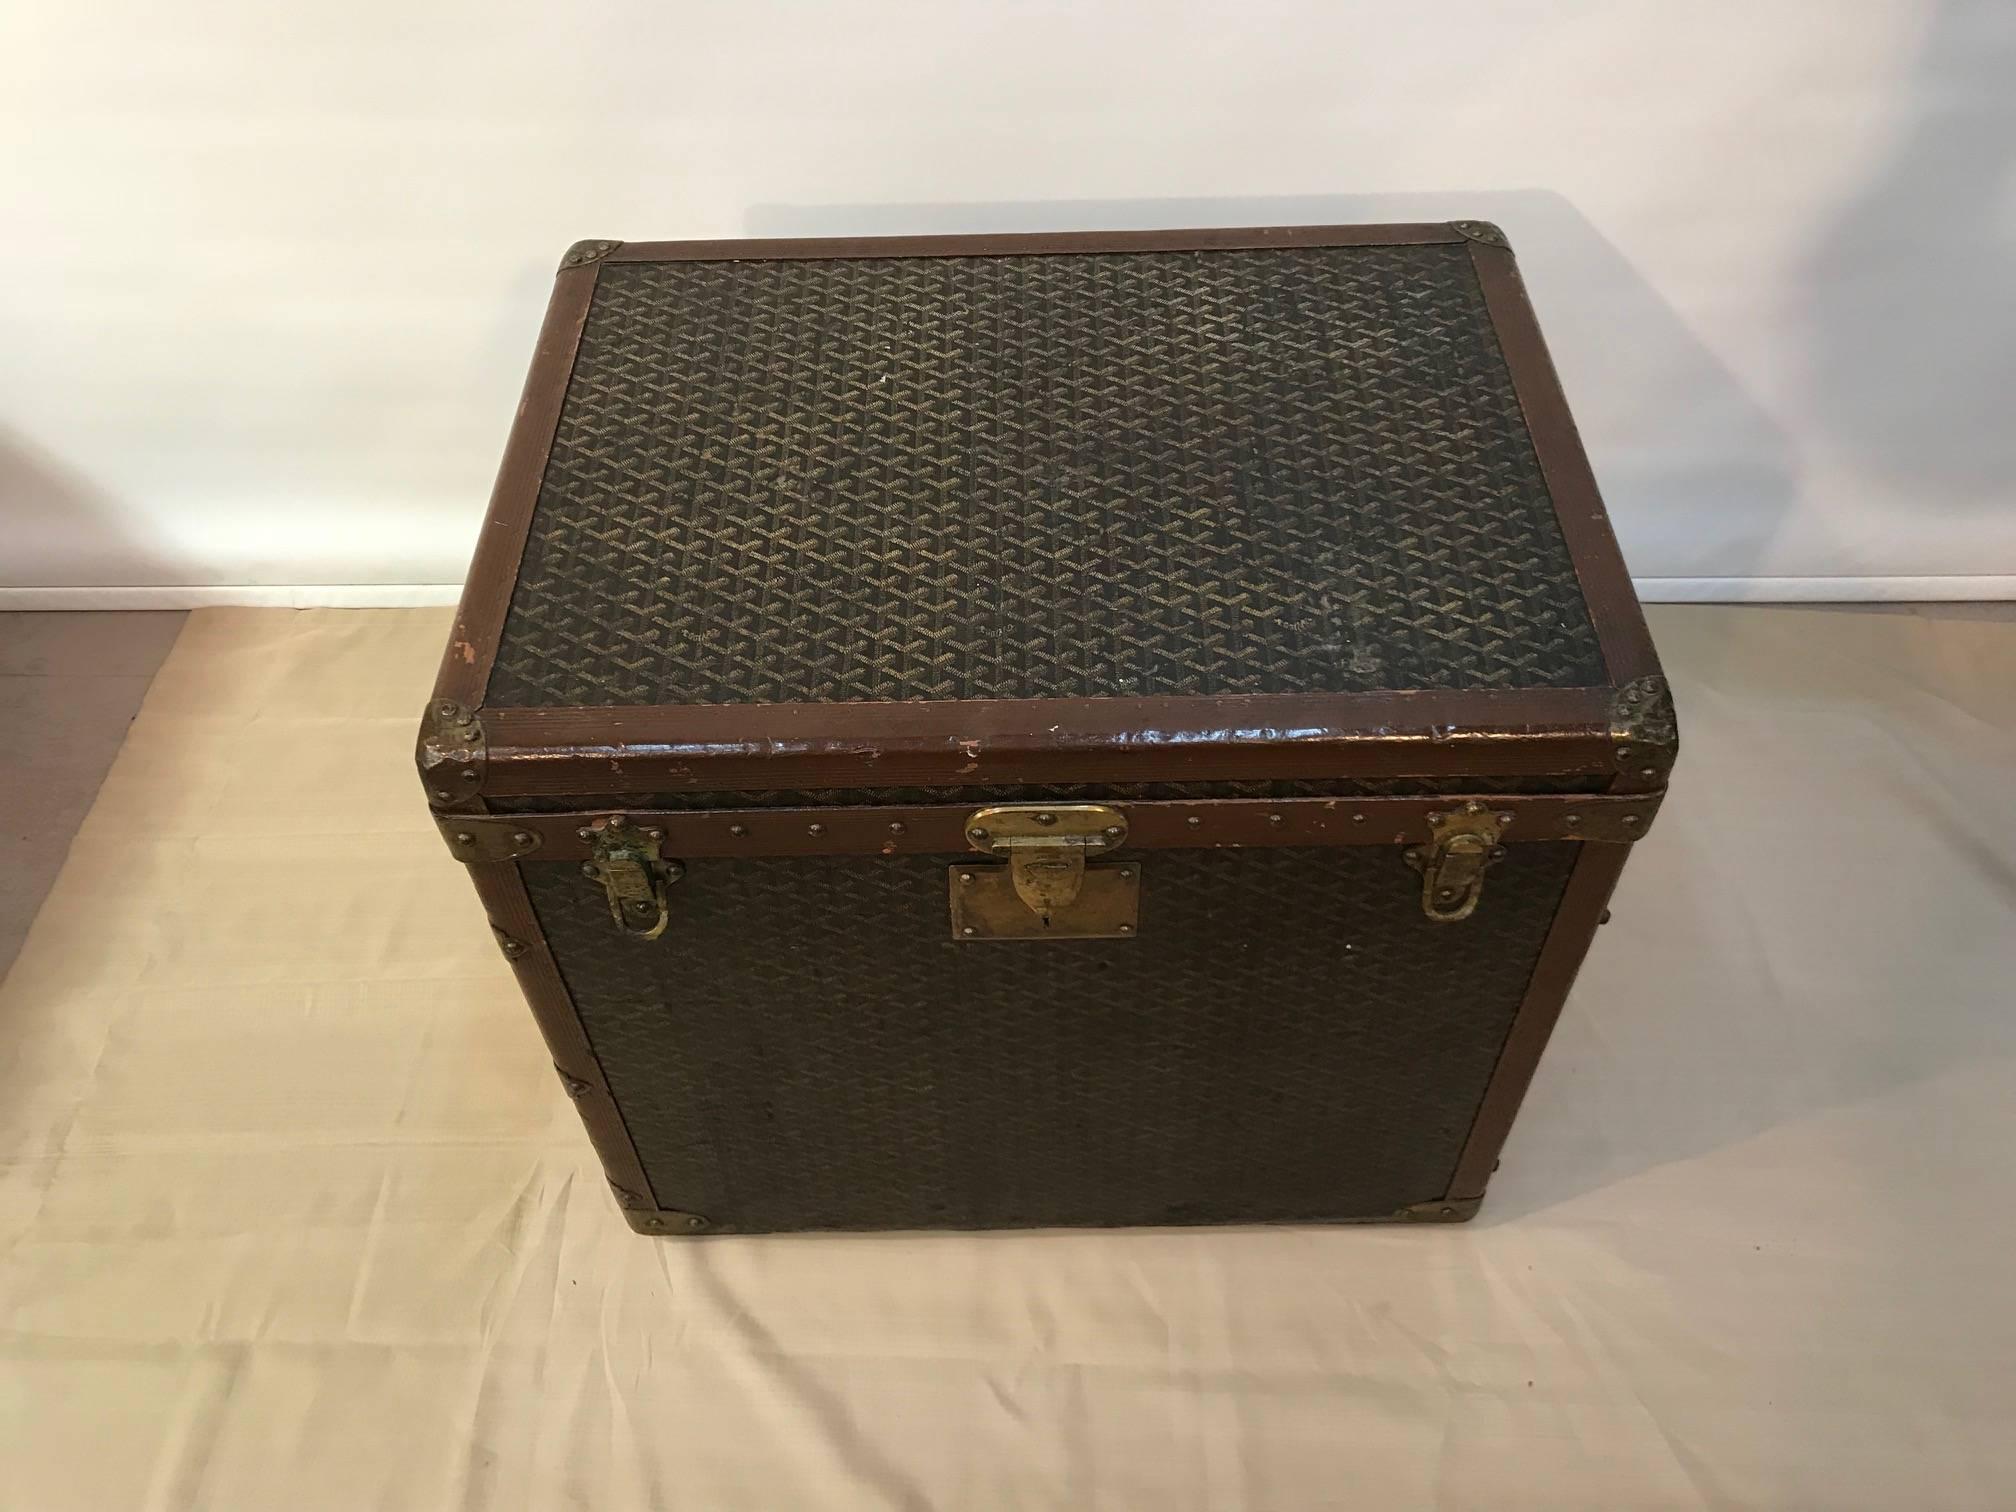 This superb trunk by the leading luggage maker of his day, opens first with a rising top to reveal a segmented compartment lined in tan baize, above a similarly lined drawer. Originally these were for shoes. The rest of the trunk is open and lined